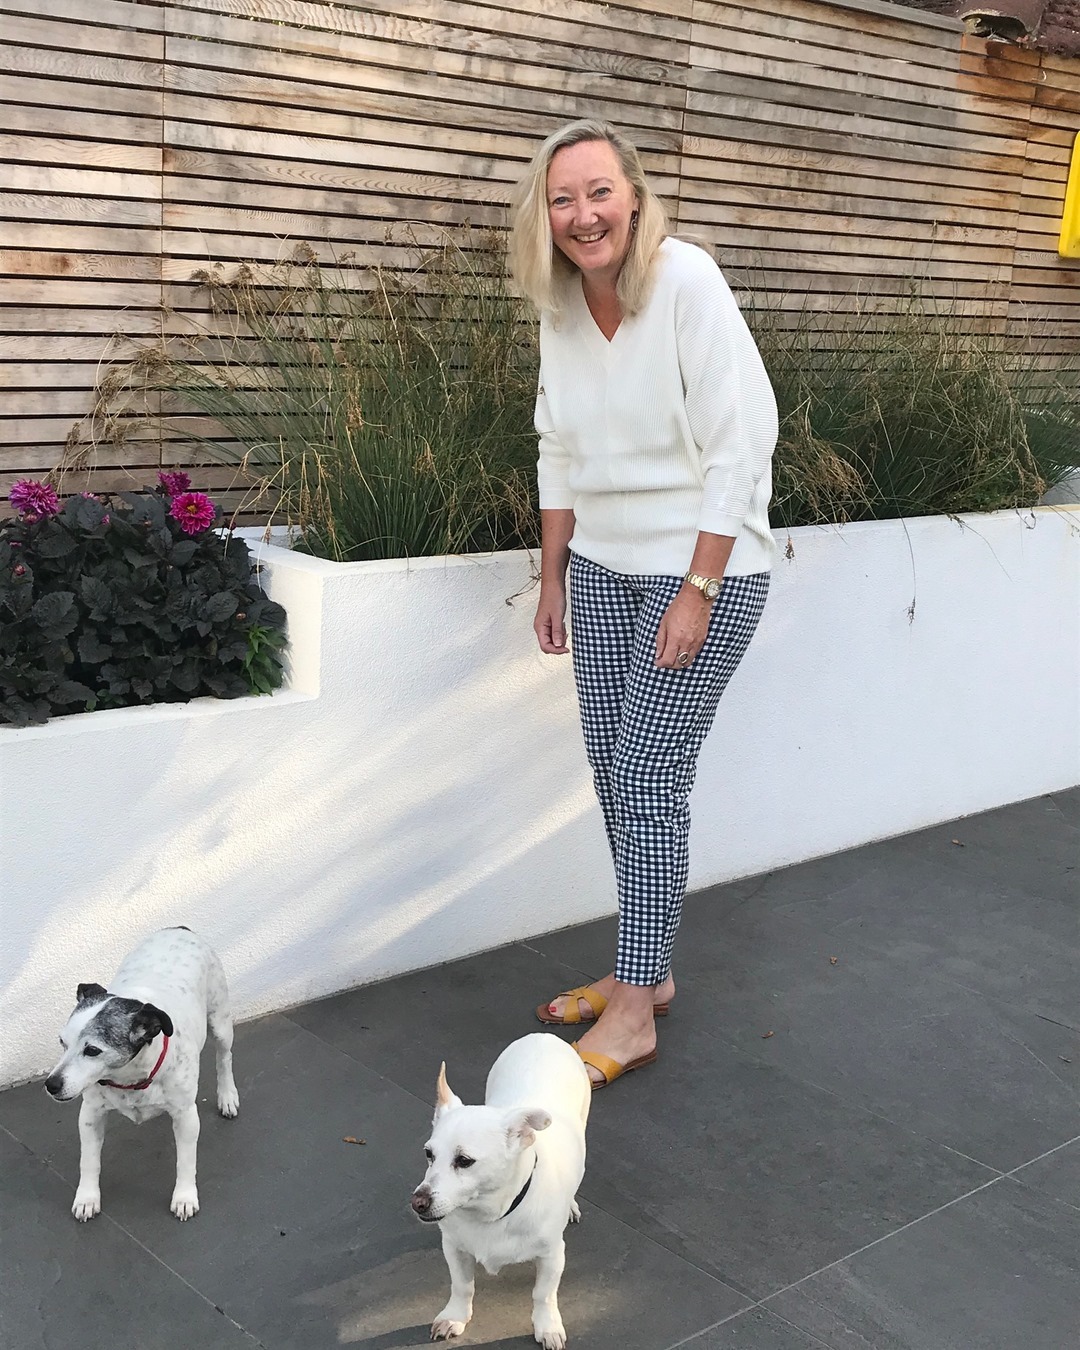 Assistant, Veronica wears our Rylie Jumper and Tyna Gingham Trousers, “This monochrome look is perfect now there’s a chill in the air and I love how it takes minimal styling to make an impact. My dogs, Daisy and Hattie approve too!" ⠀⠀⠀⠀⠀⠀⠀⠀⠀